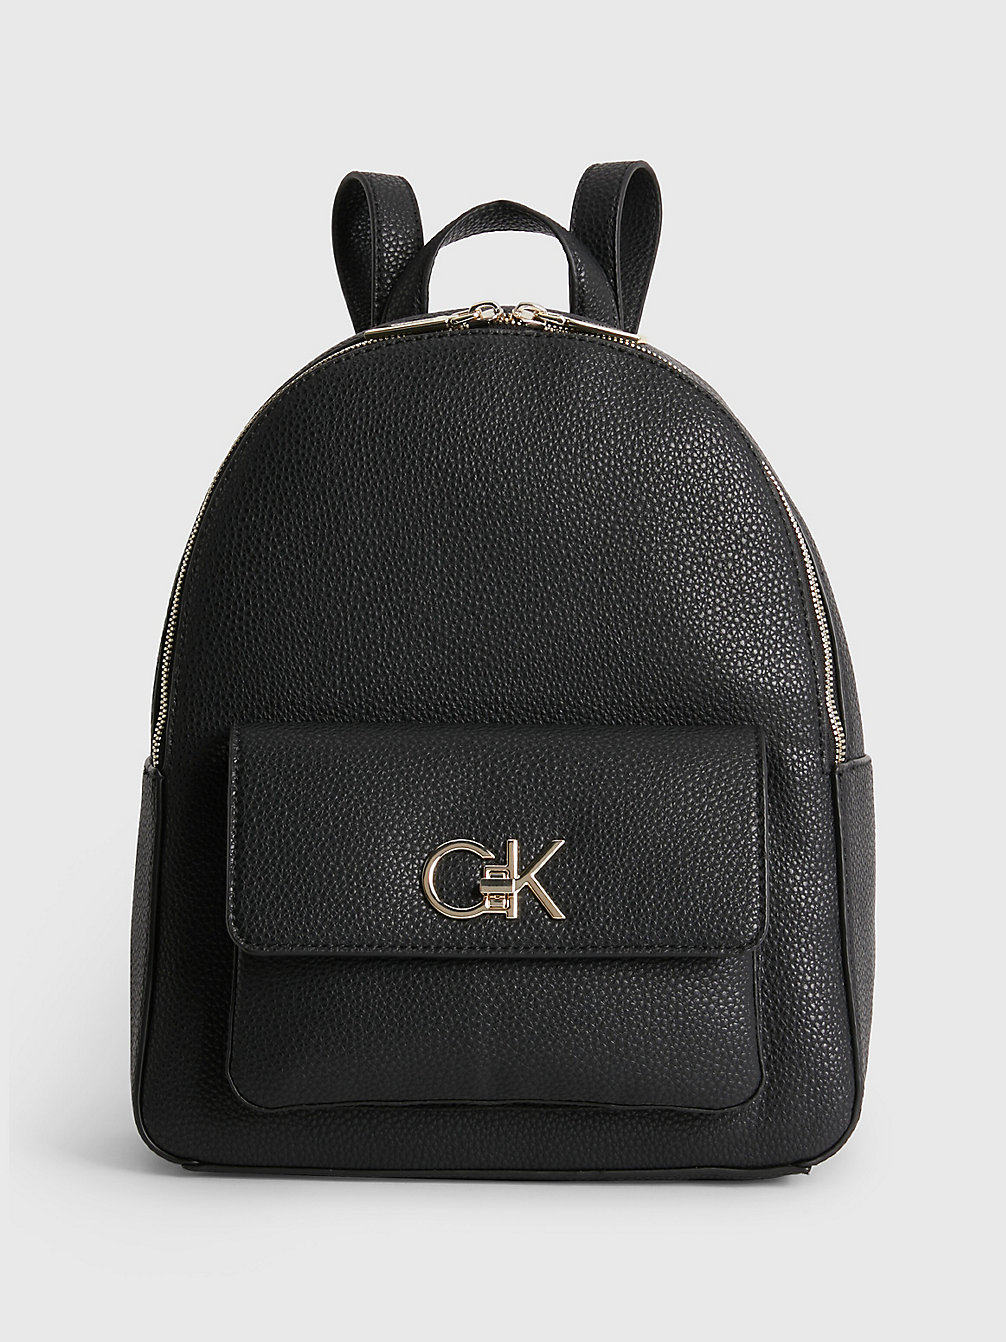 CK BLACK Recycled Round Backpack undefined women Calvin Klein